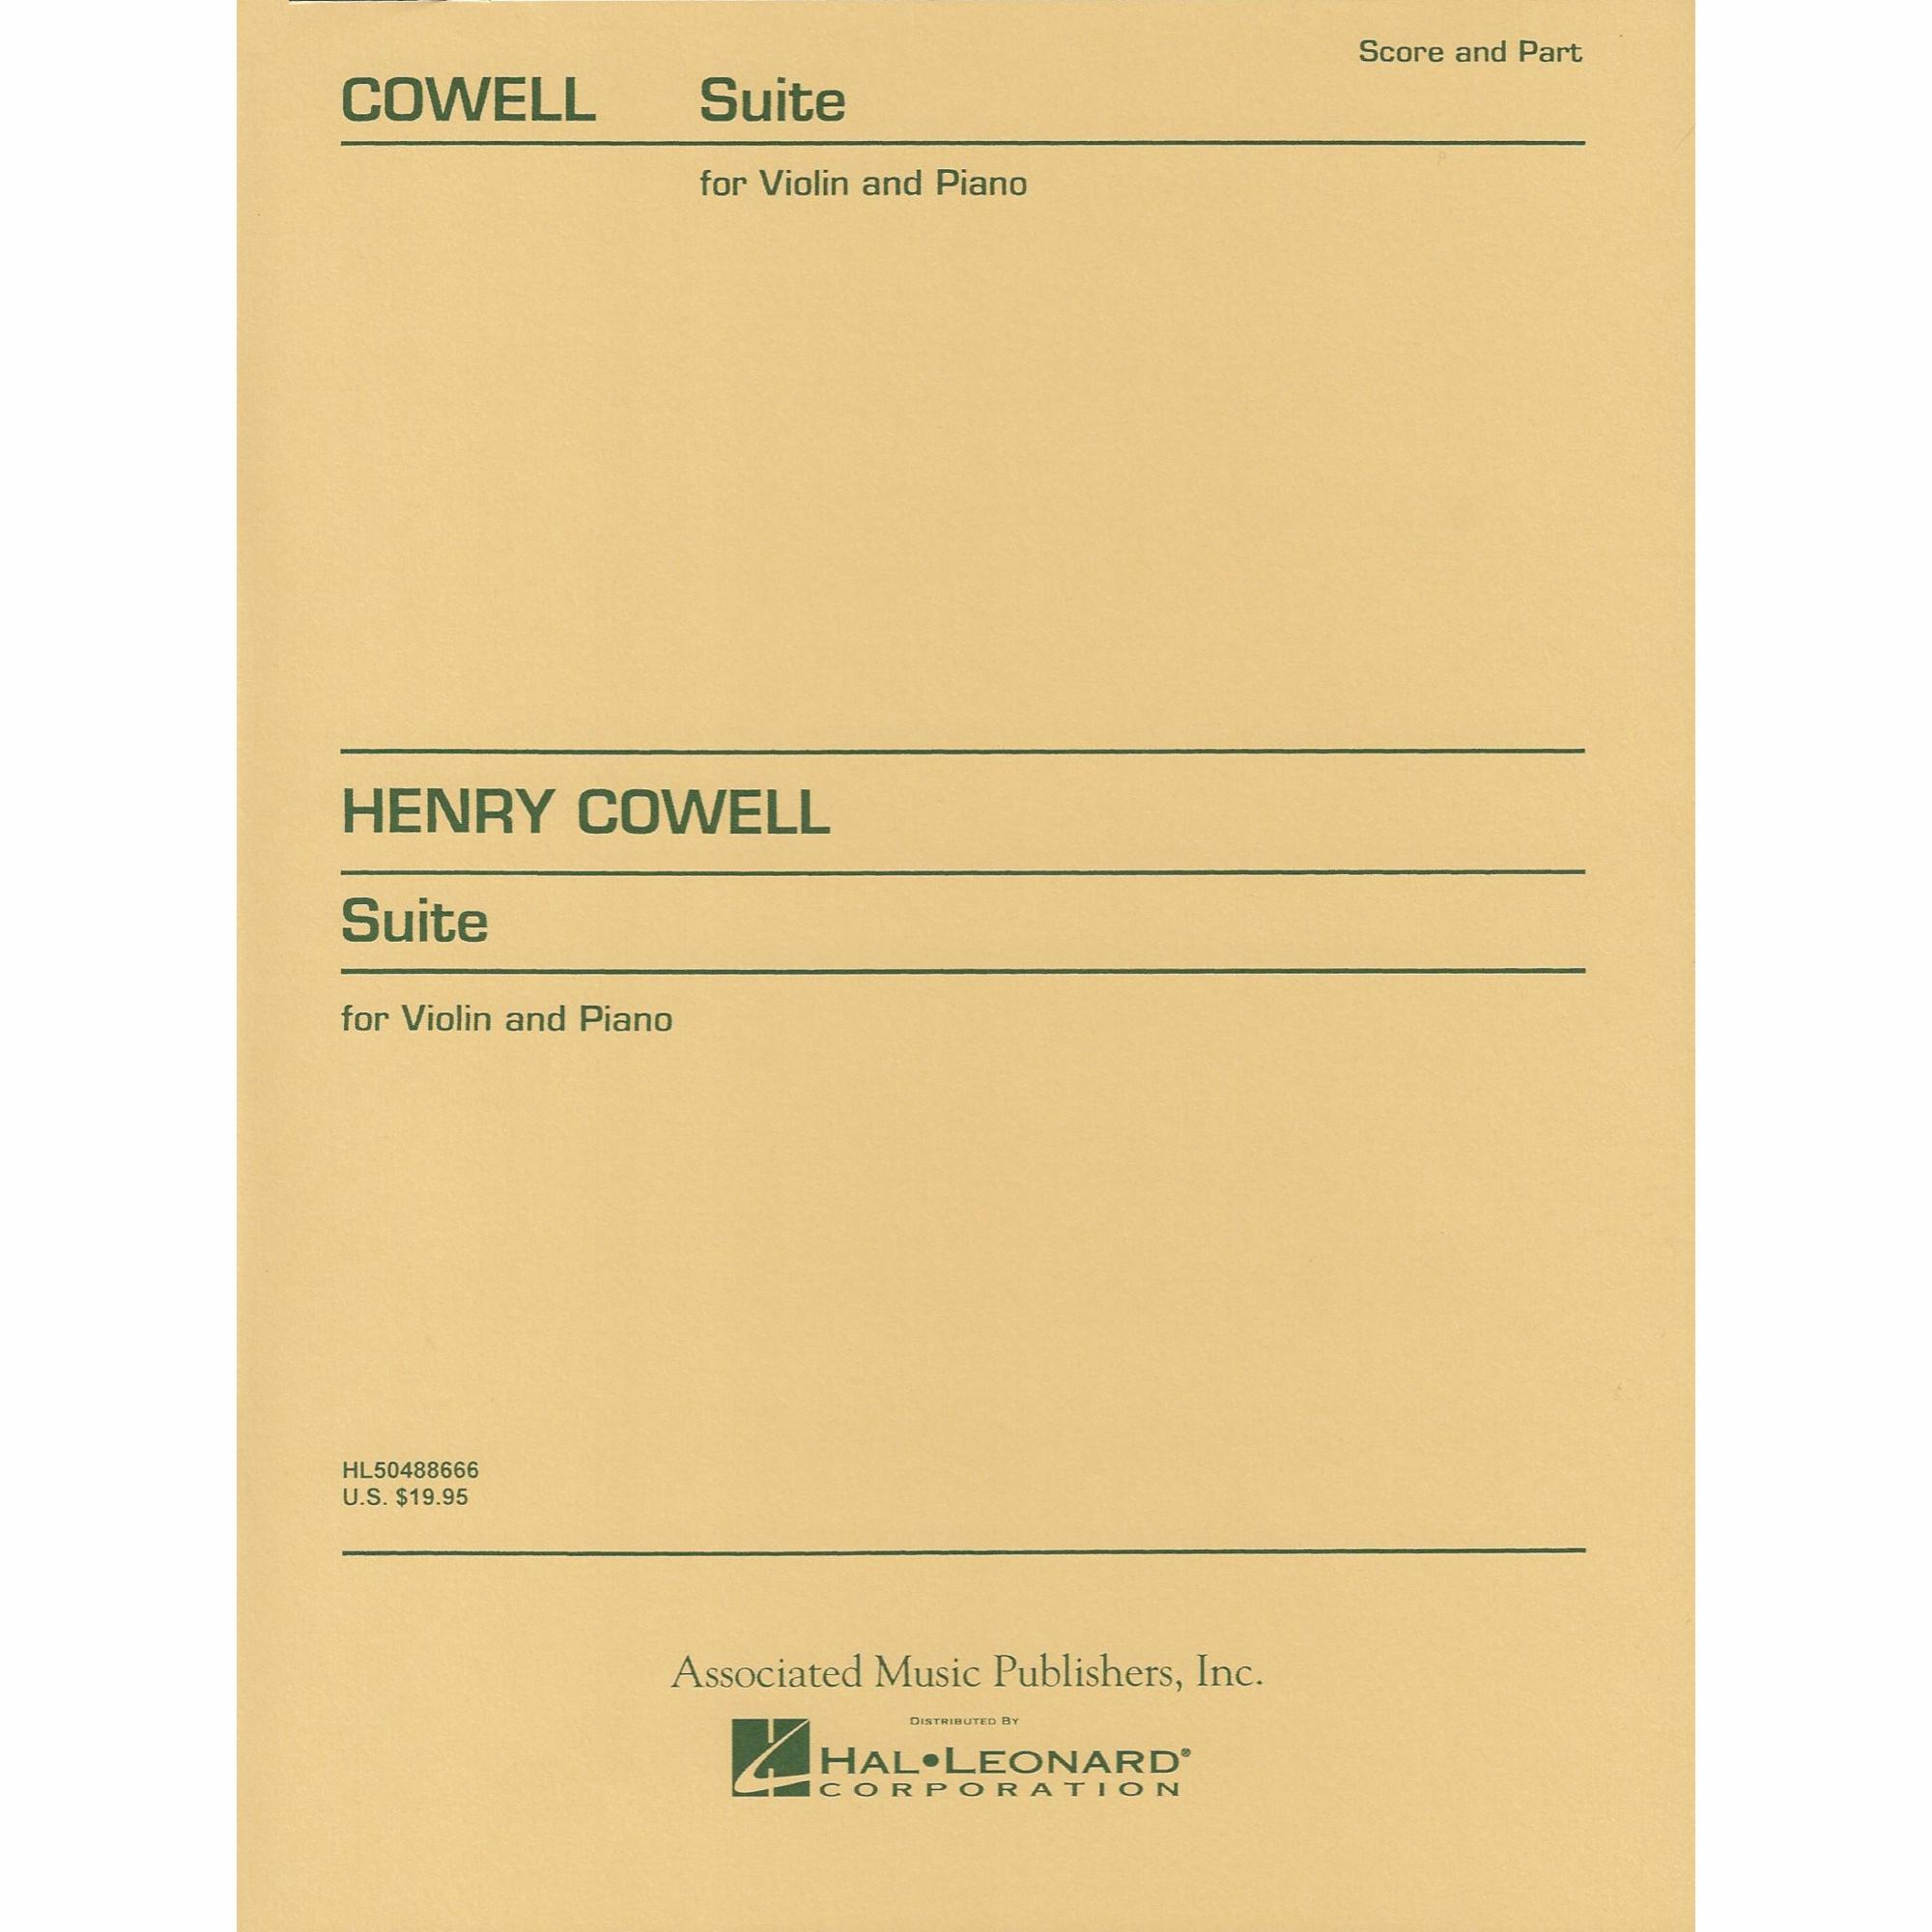 Cowell -- Suite for Violin and Piano